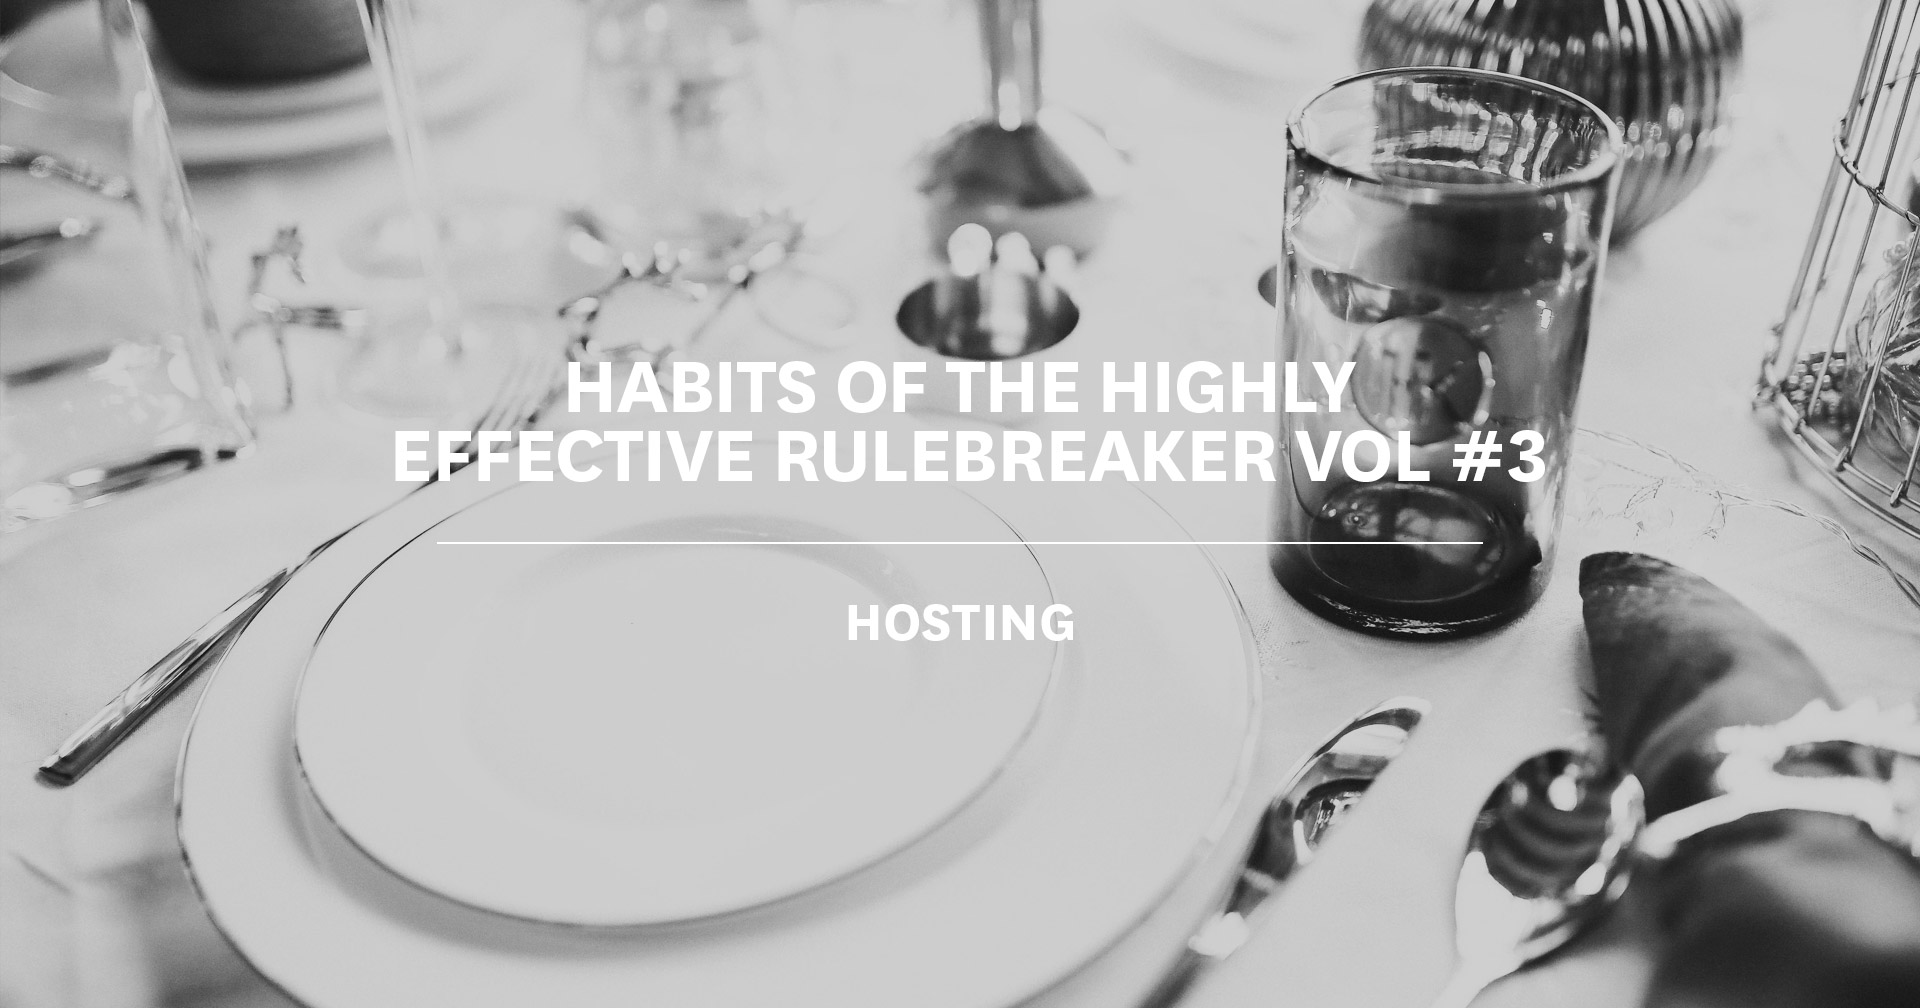 The Habits of the Highly Effective Rulebreaker Vol #3: Hosting